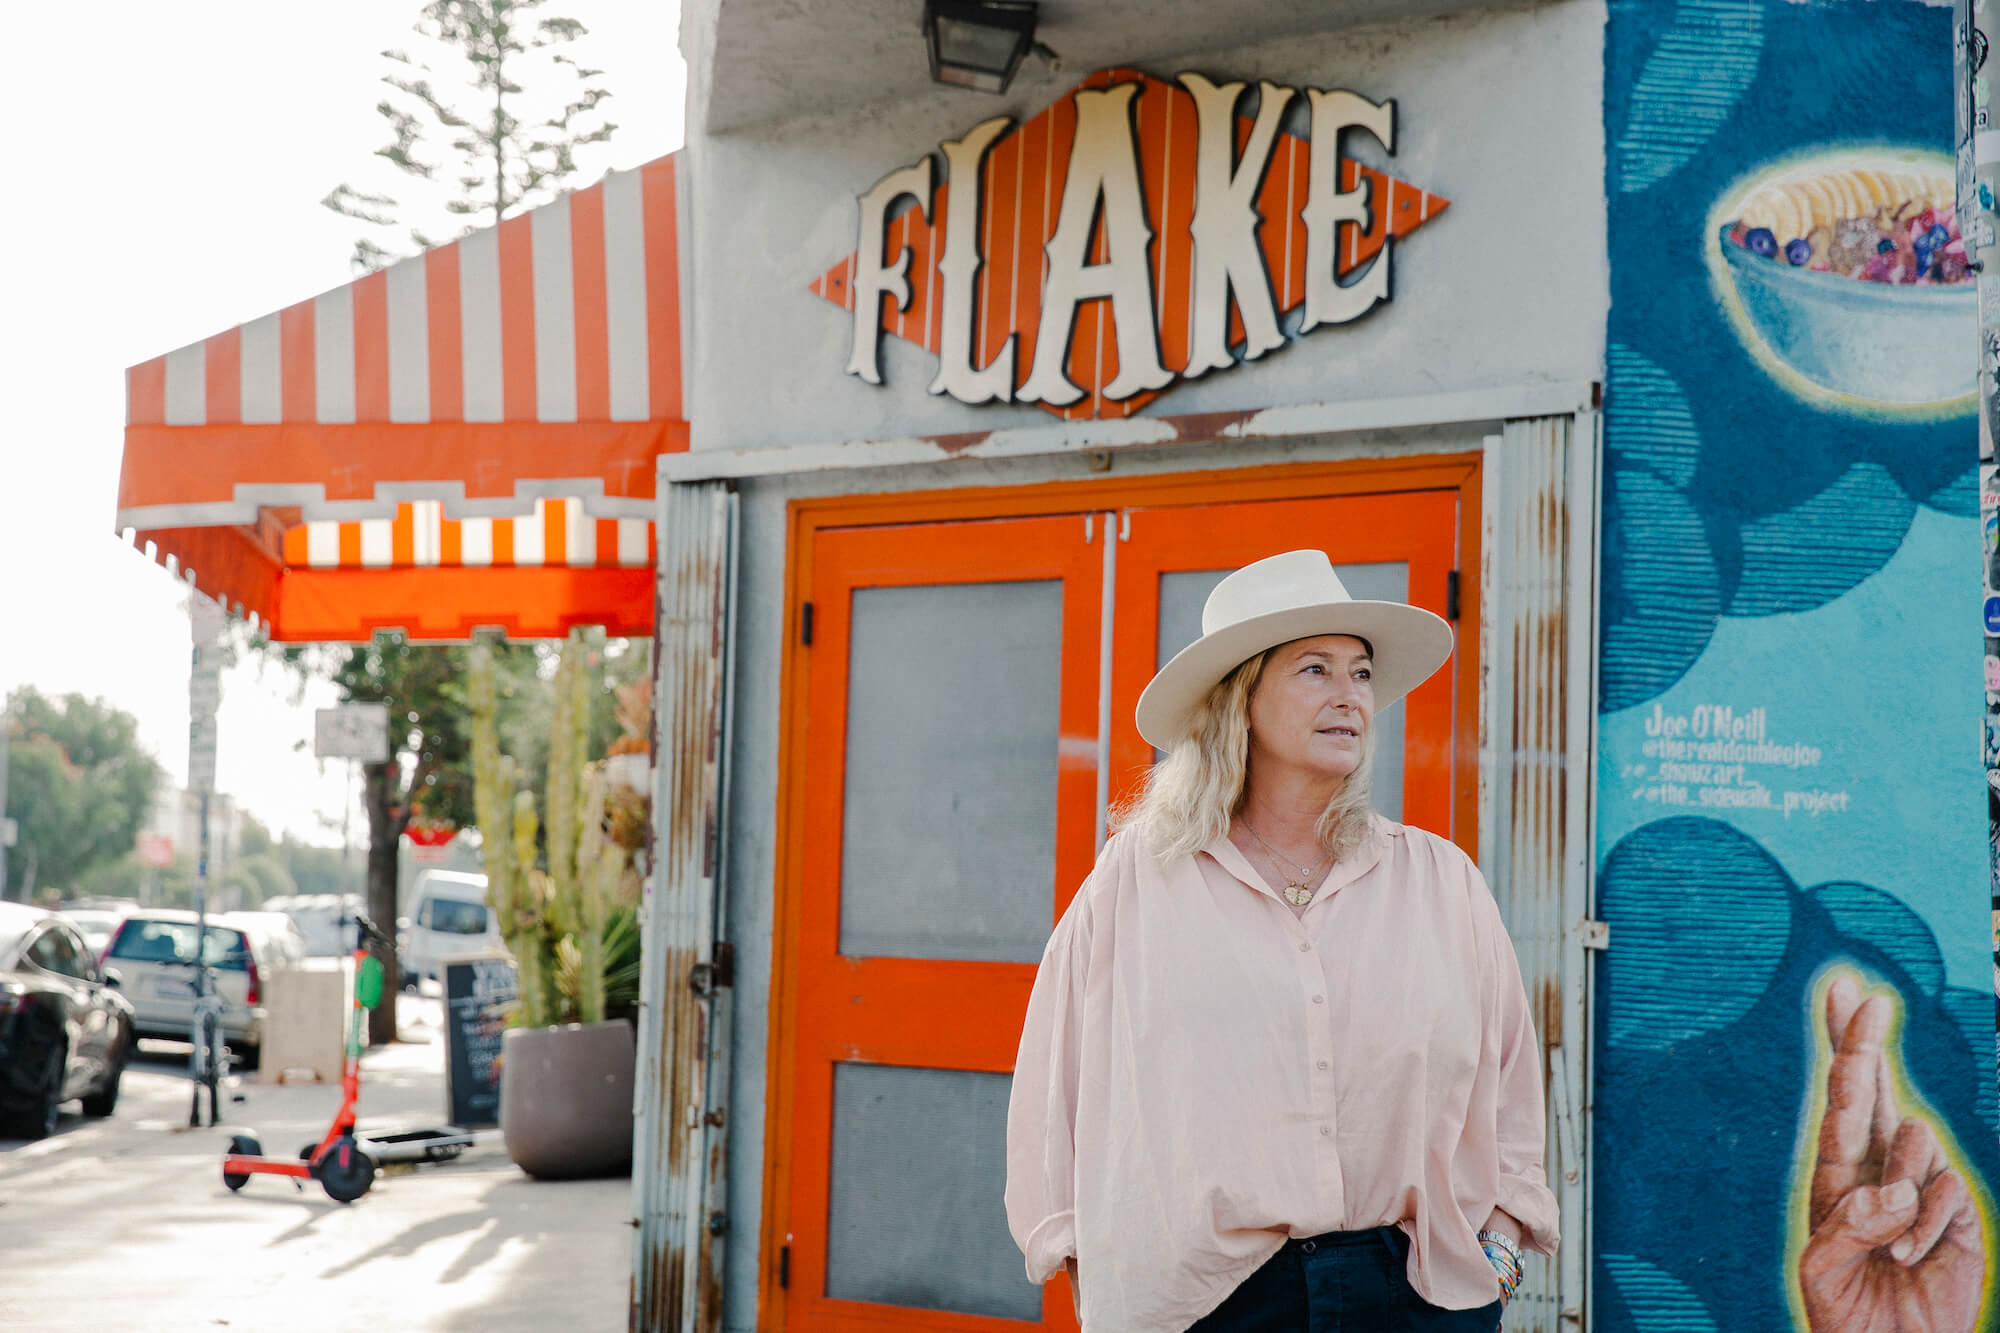 Paige Clay, owner of Flake, said that Rose Avenue's culture faces threats from opposite directions—a more unpredictable homeless population that made the street feel unsafe, and a post-tech, moneyed population that isn't interested in Venice's boho pedigree.